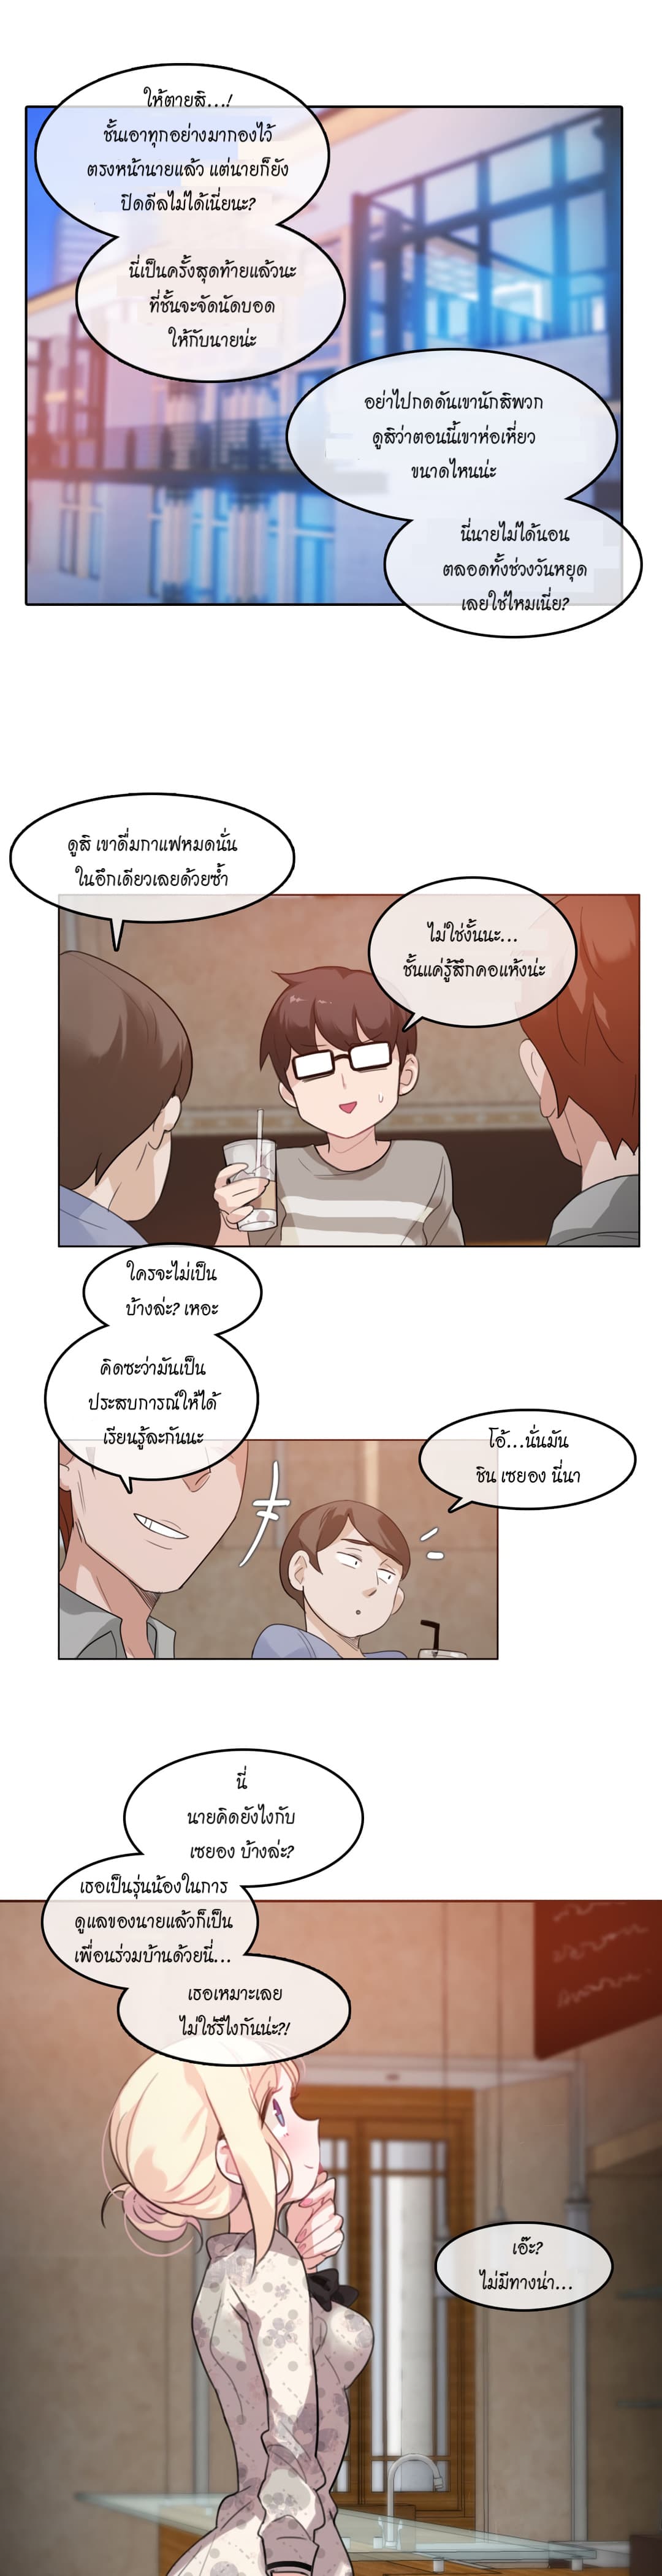 A Pervert’s Daily Life 28 (1)